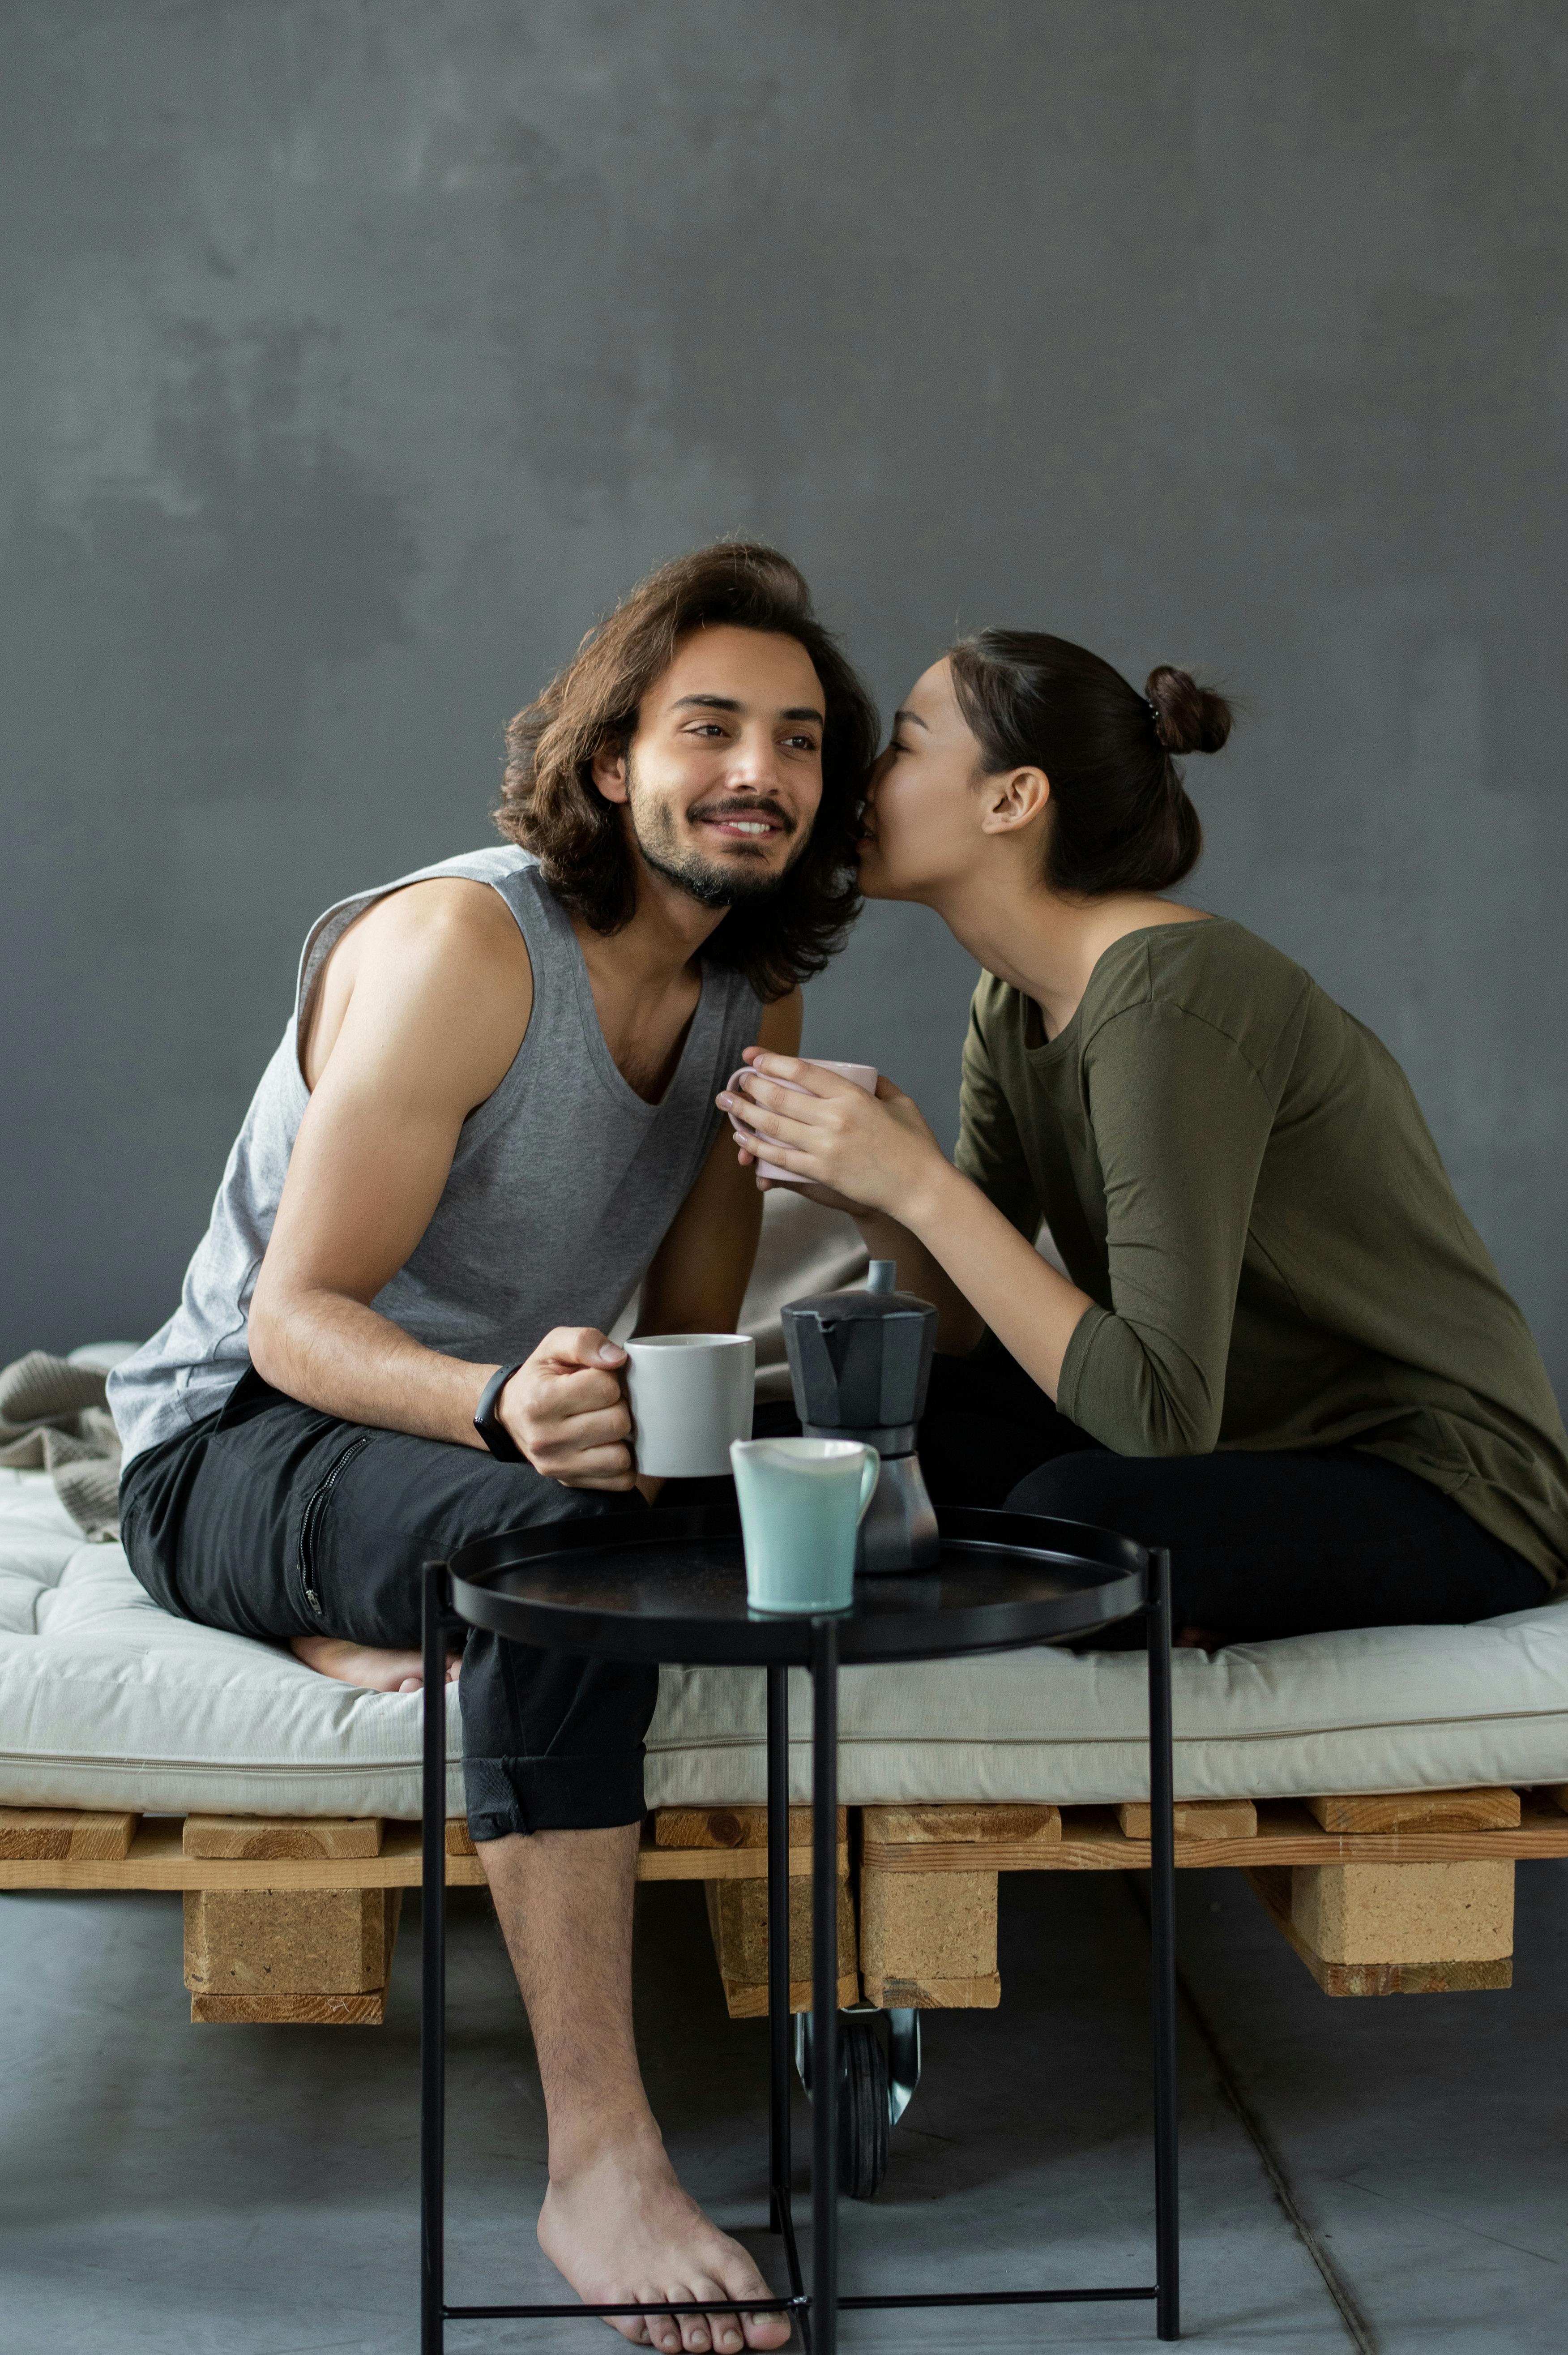 A man smiling while a woman whispers something to him while having beverages | Source: Pexels